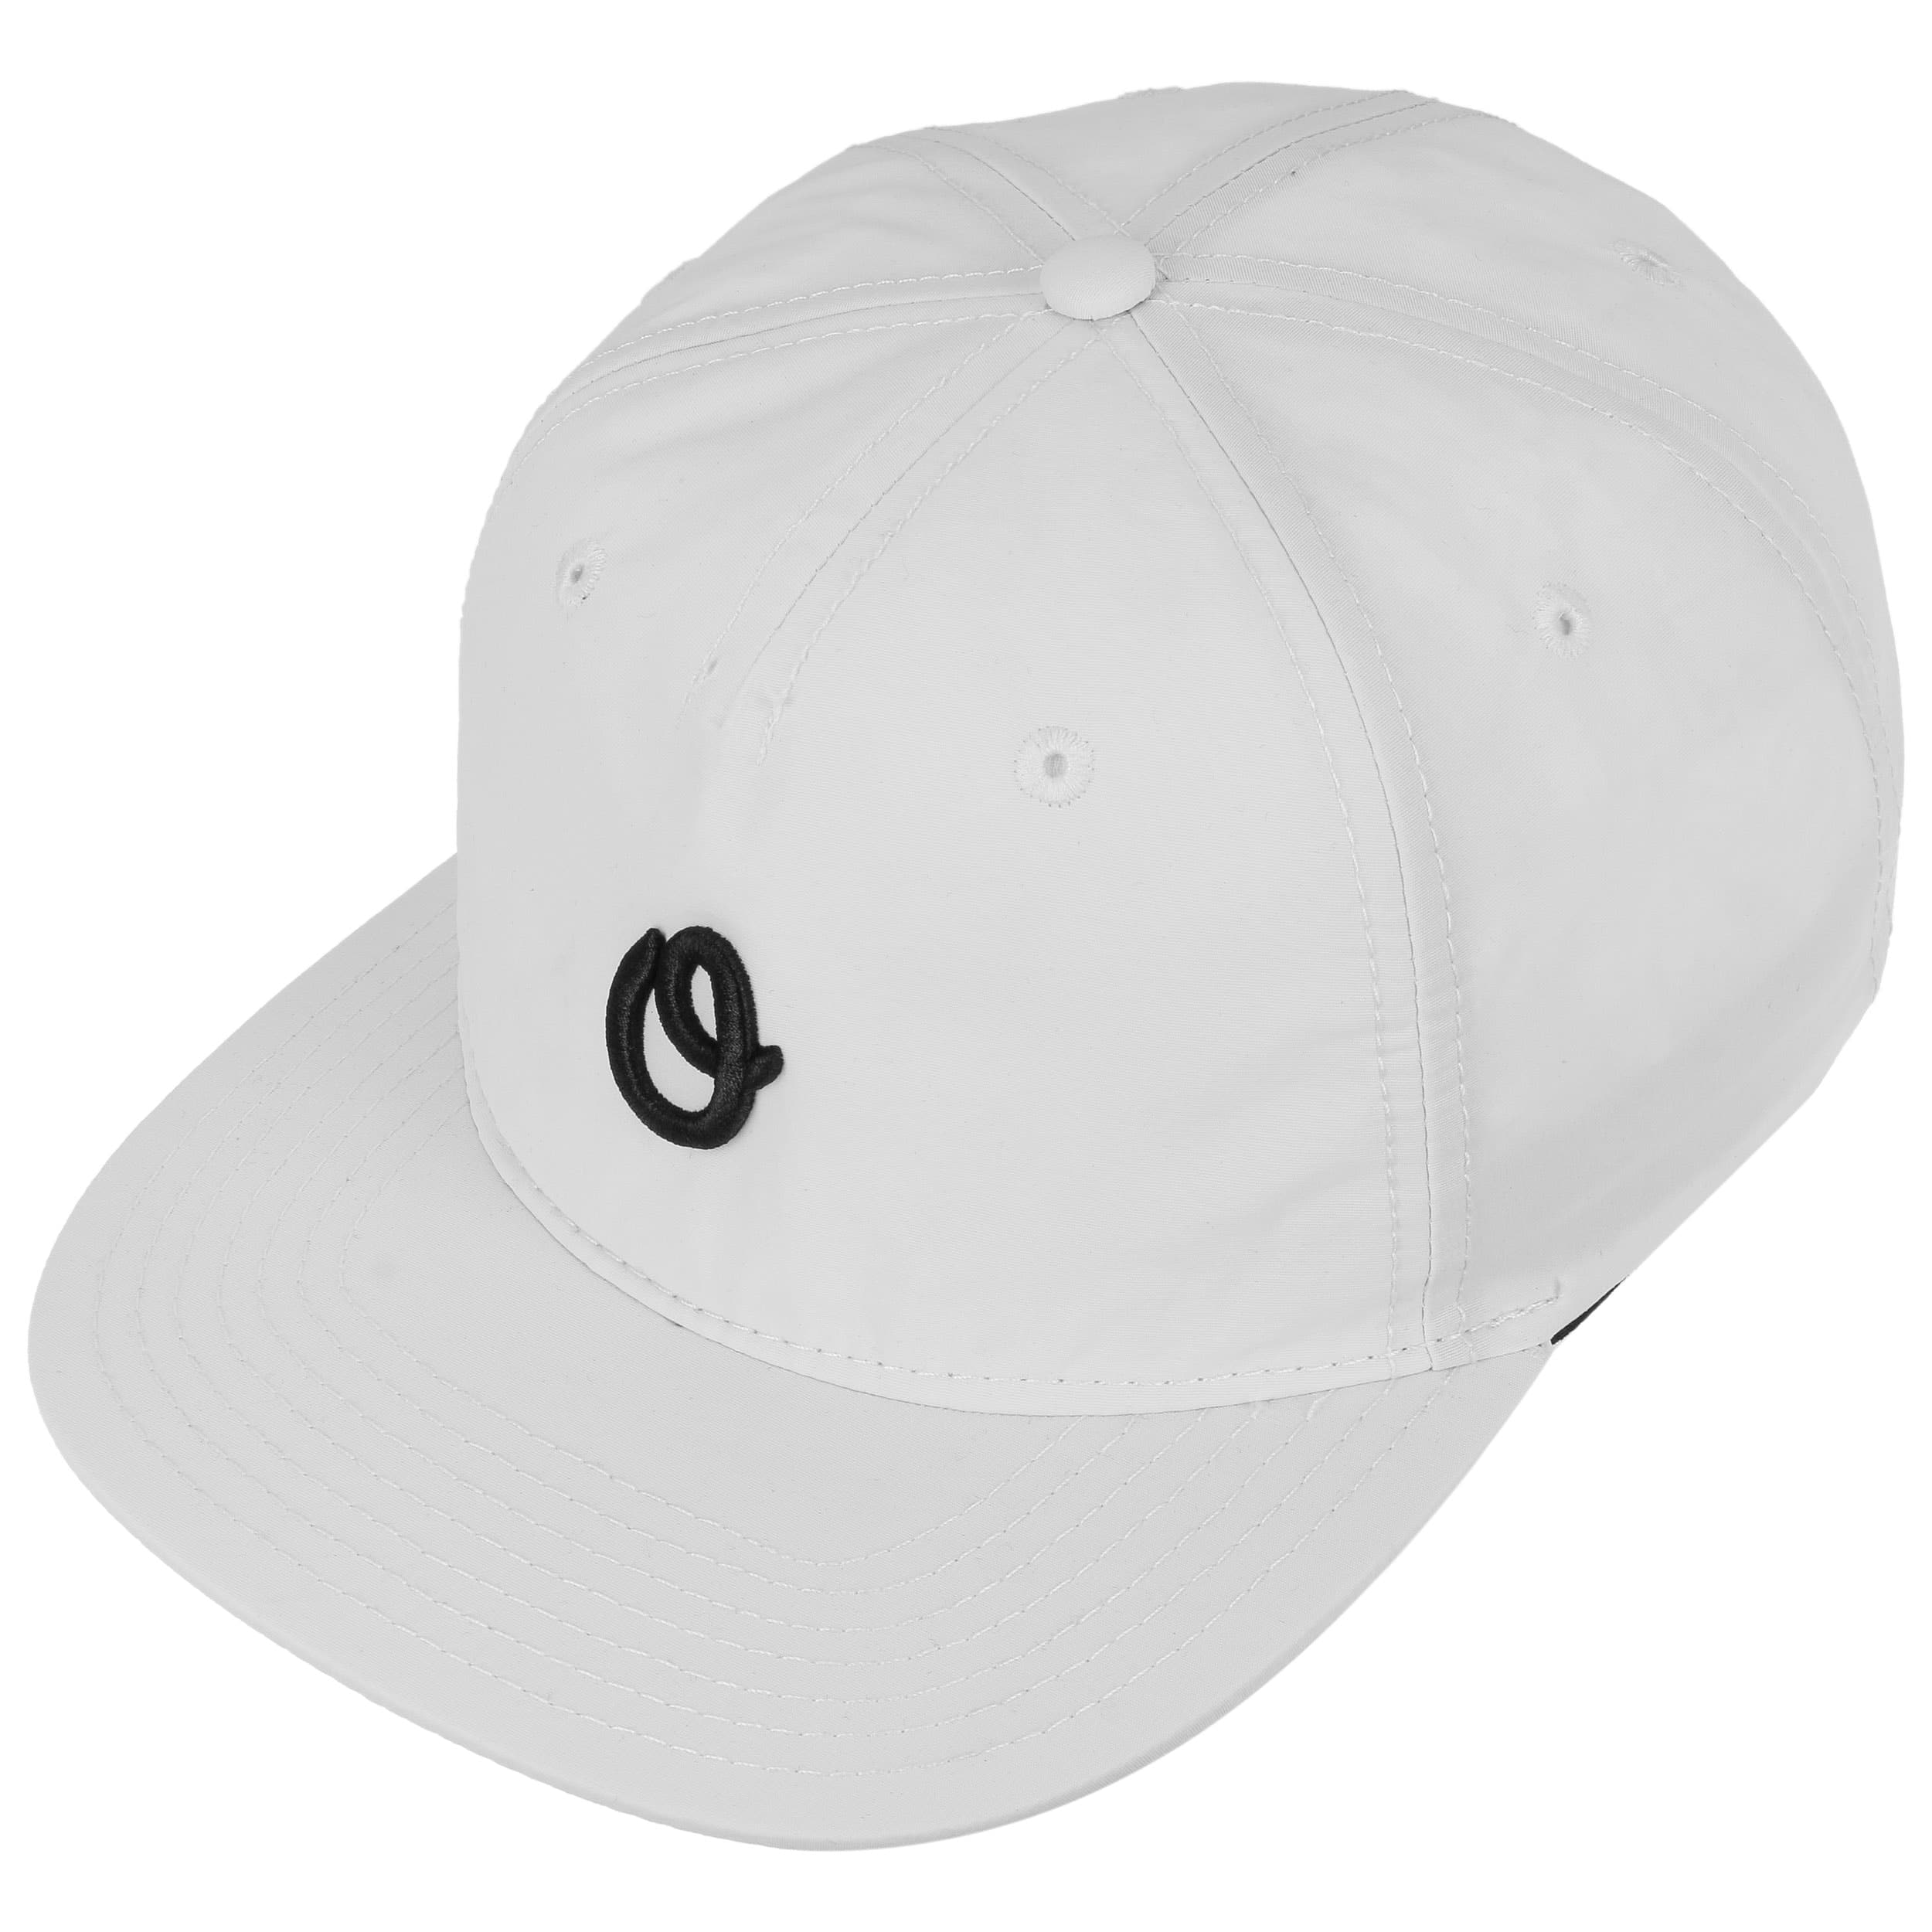 Miles Olo EvDay Cap by Official Headwear, EUR 24,95 --> Hats, caps ...